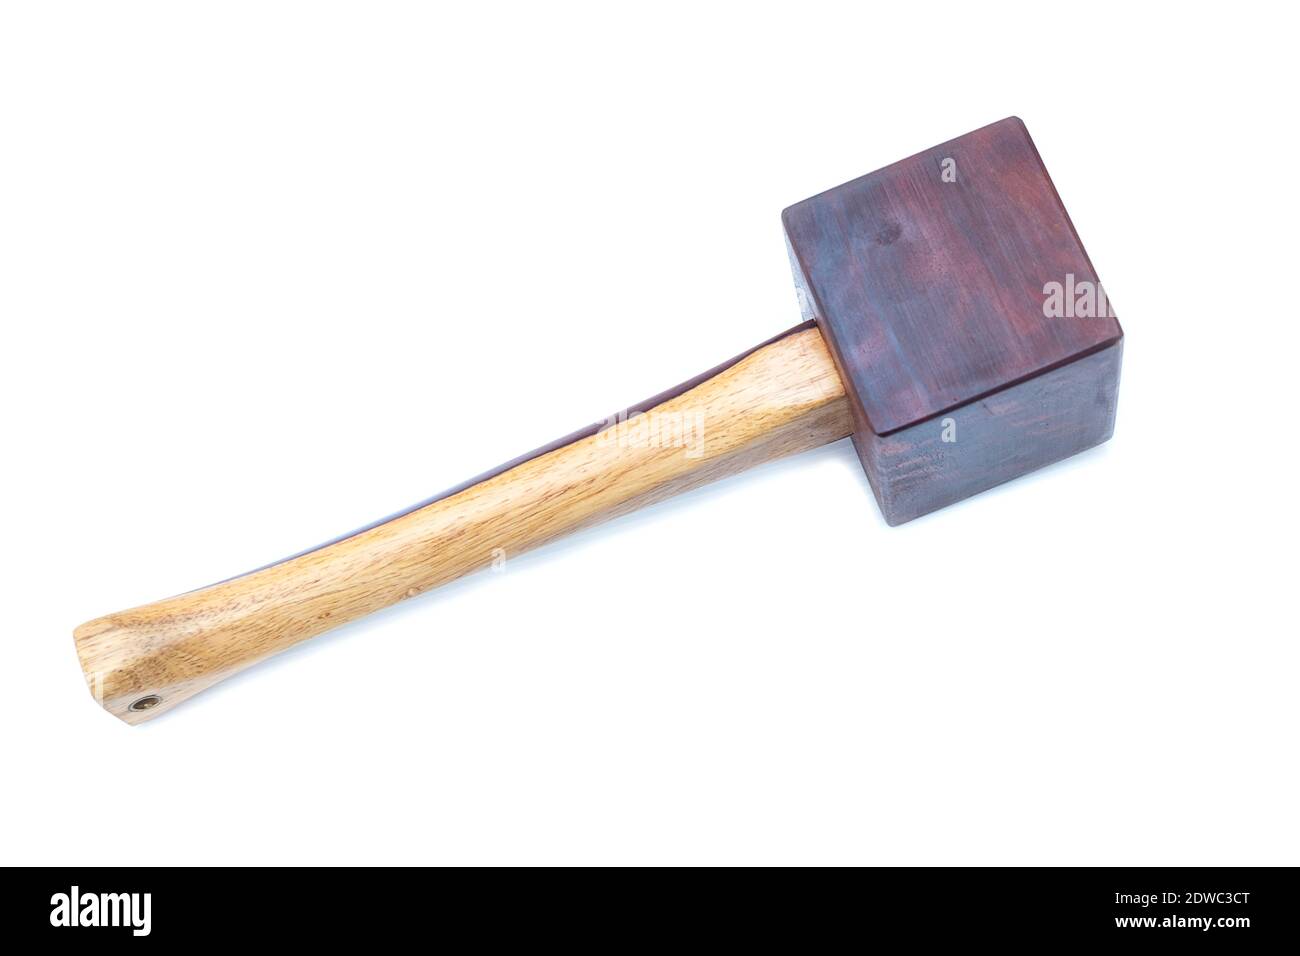 Mallet Hammer Made Of Wood Tools For Used By Carpenter In Workshop On  Isolated White Background Stock Photo - Alamy